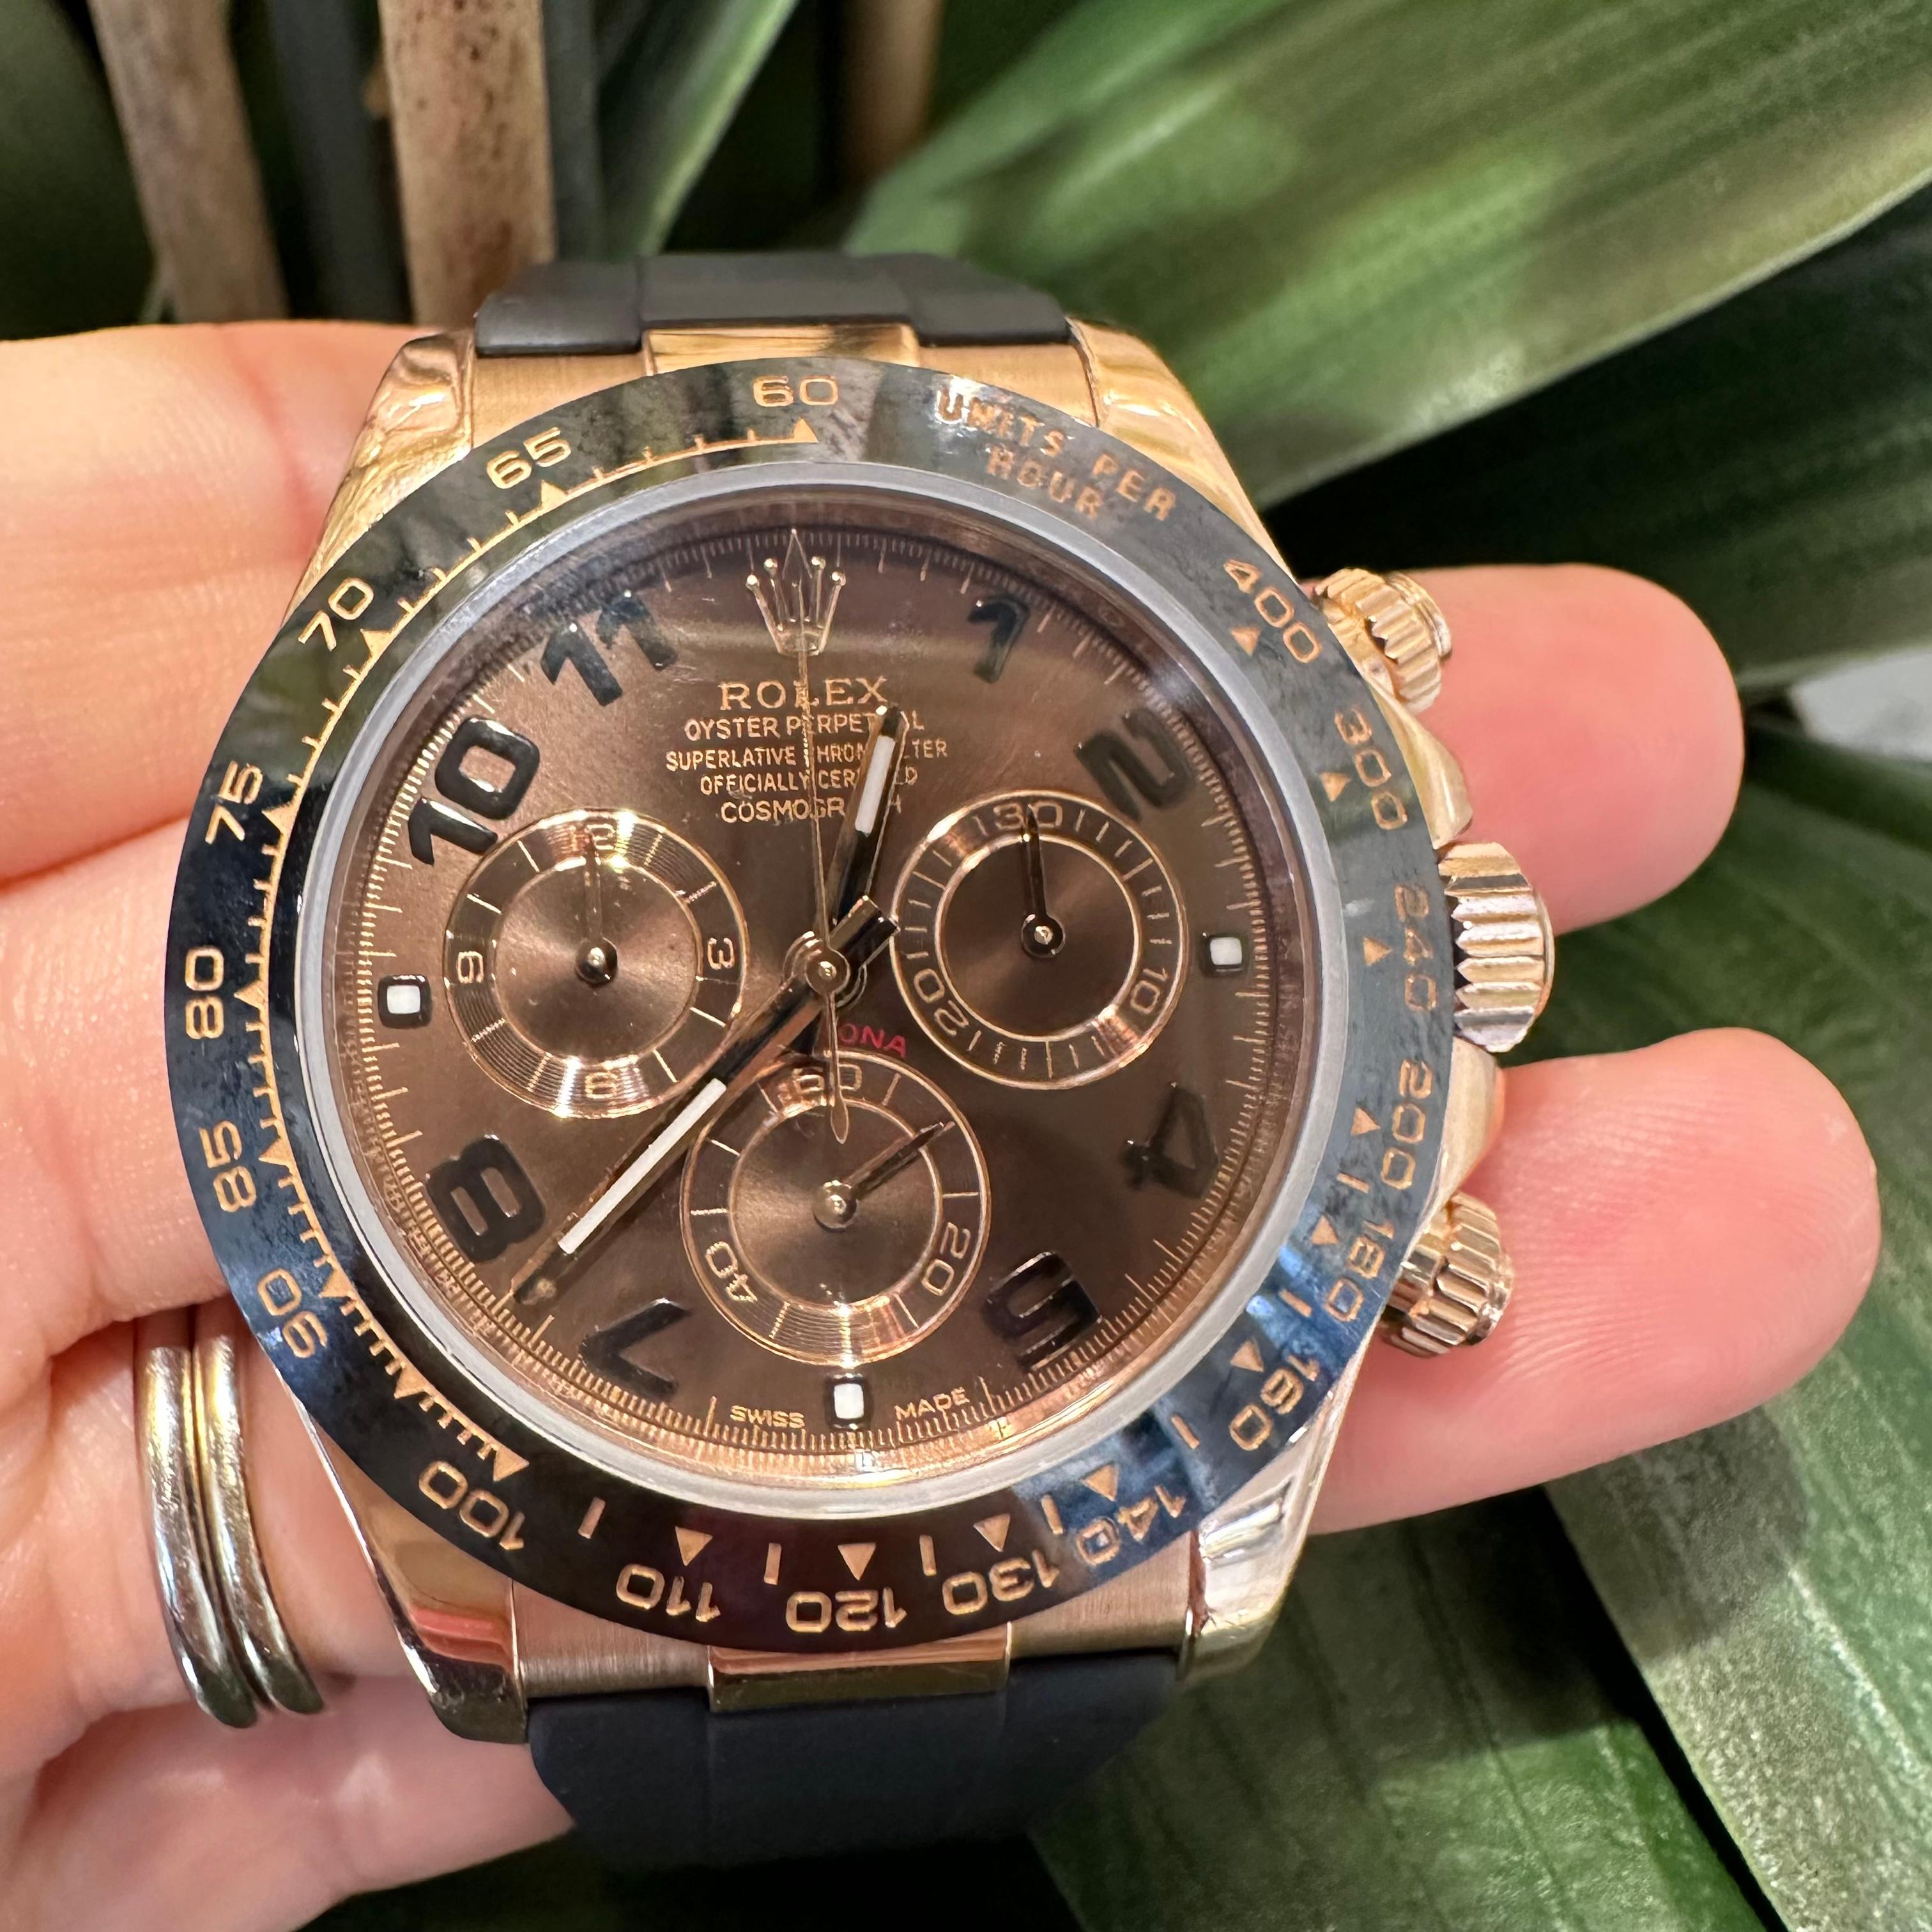 Brand: Rolex 

Model Name: Daytona

Model Number: 116519

Movement: Automatic

Case Size: 40  mm

Case Back: Closed 

Case Material:  Rose Gold

Bezel: Rose Gold 

Dial: Chocolate with Arabic hour markers

Bracelet: Rubber B 

Hour Markers: